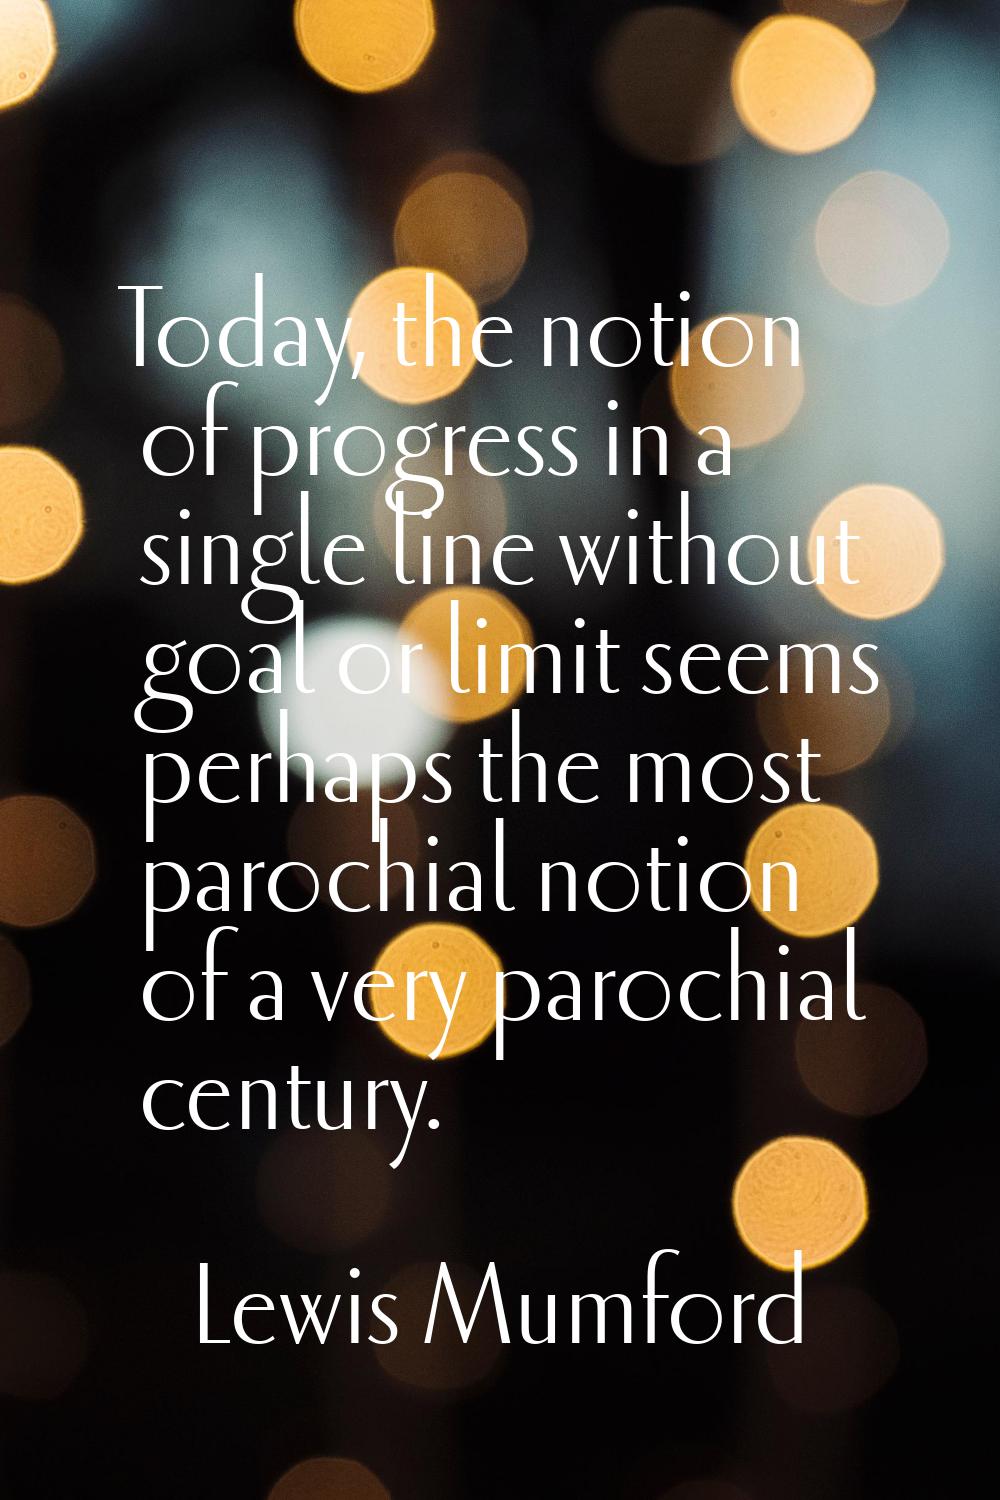 Today, the notion of progress in a single line without goal or limit seems perhaps the most parochi